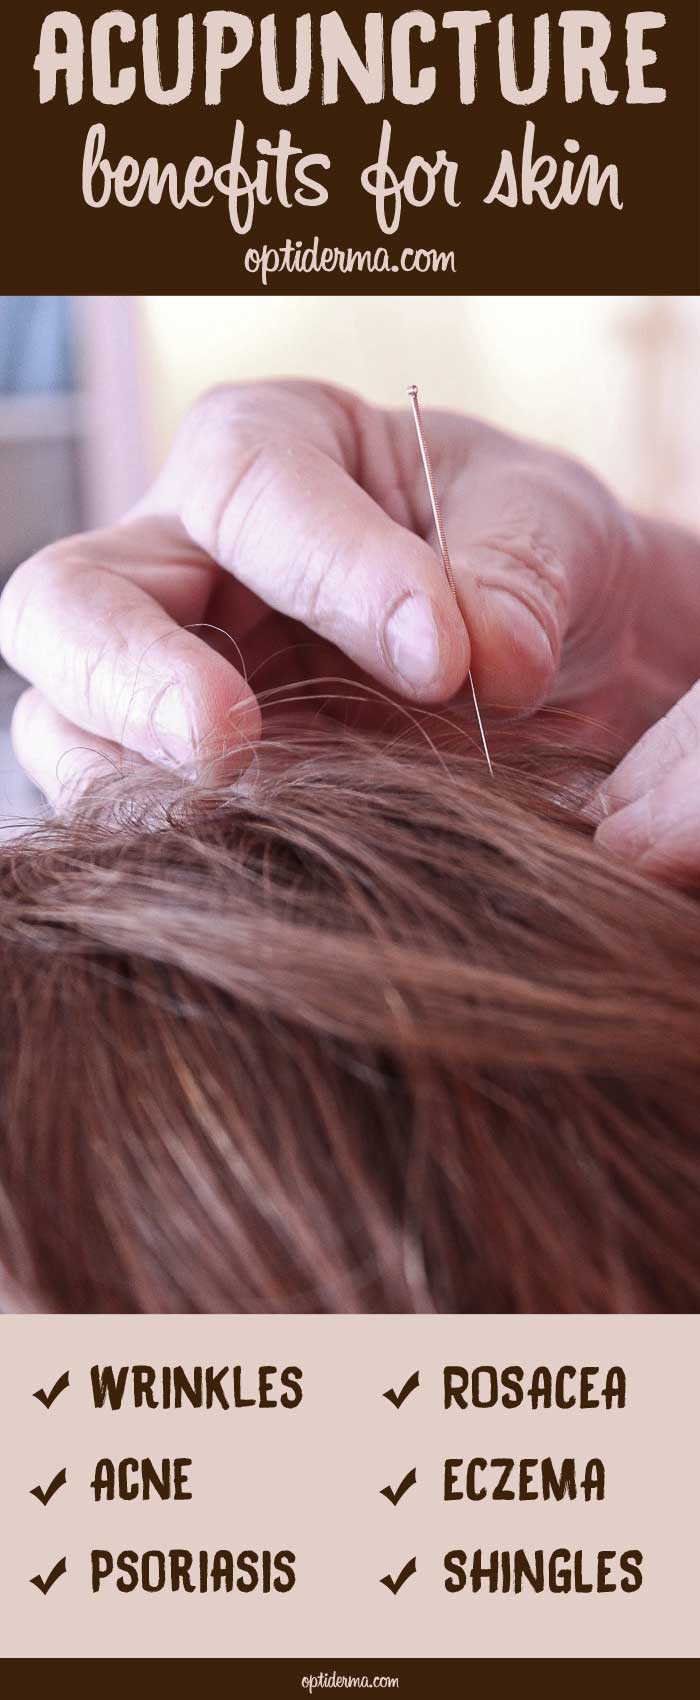 Benefits of acupuncture for skin